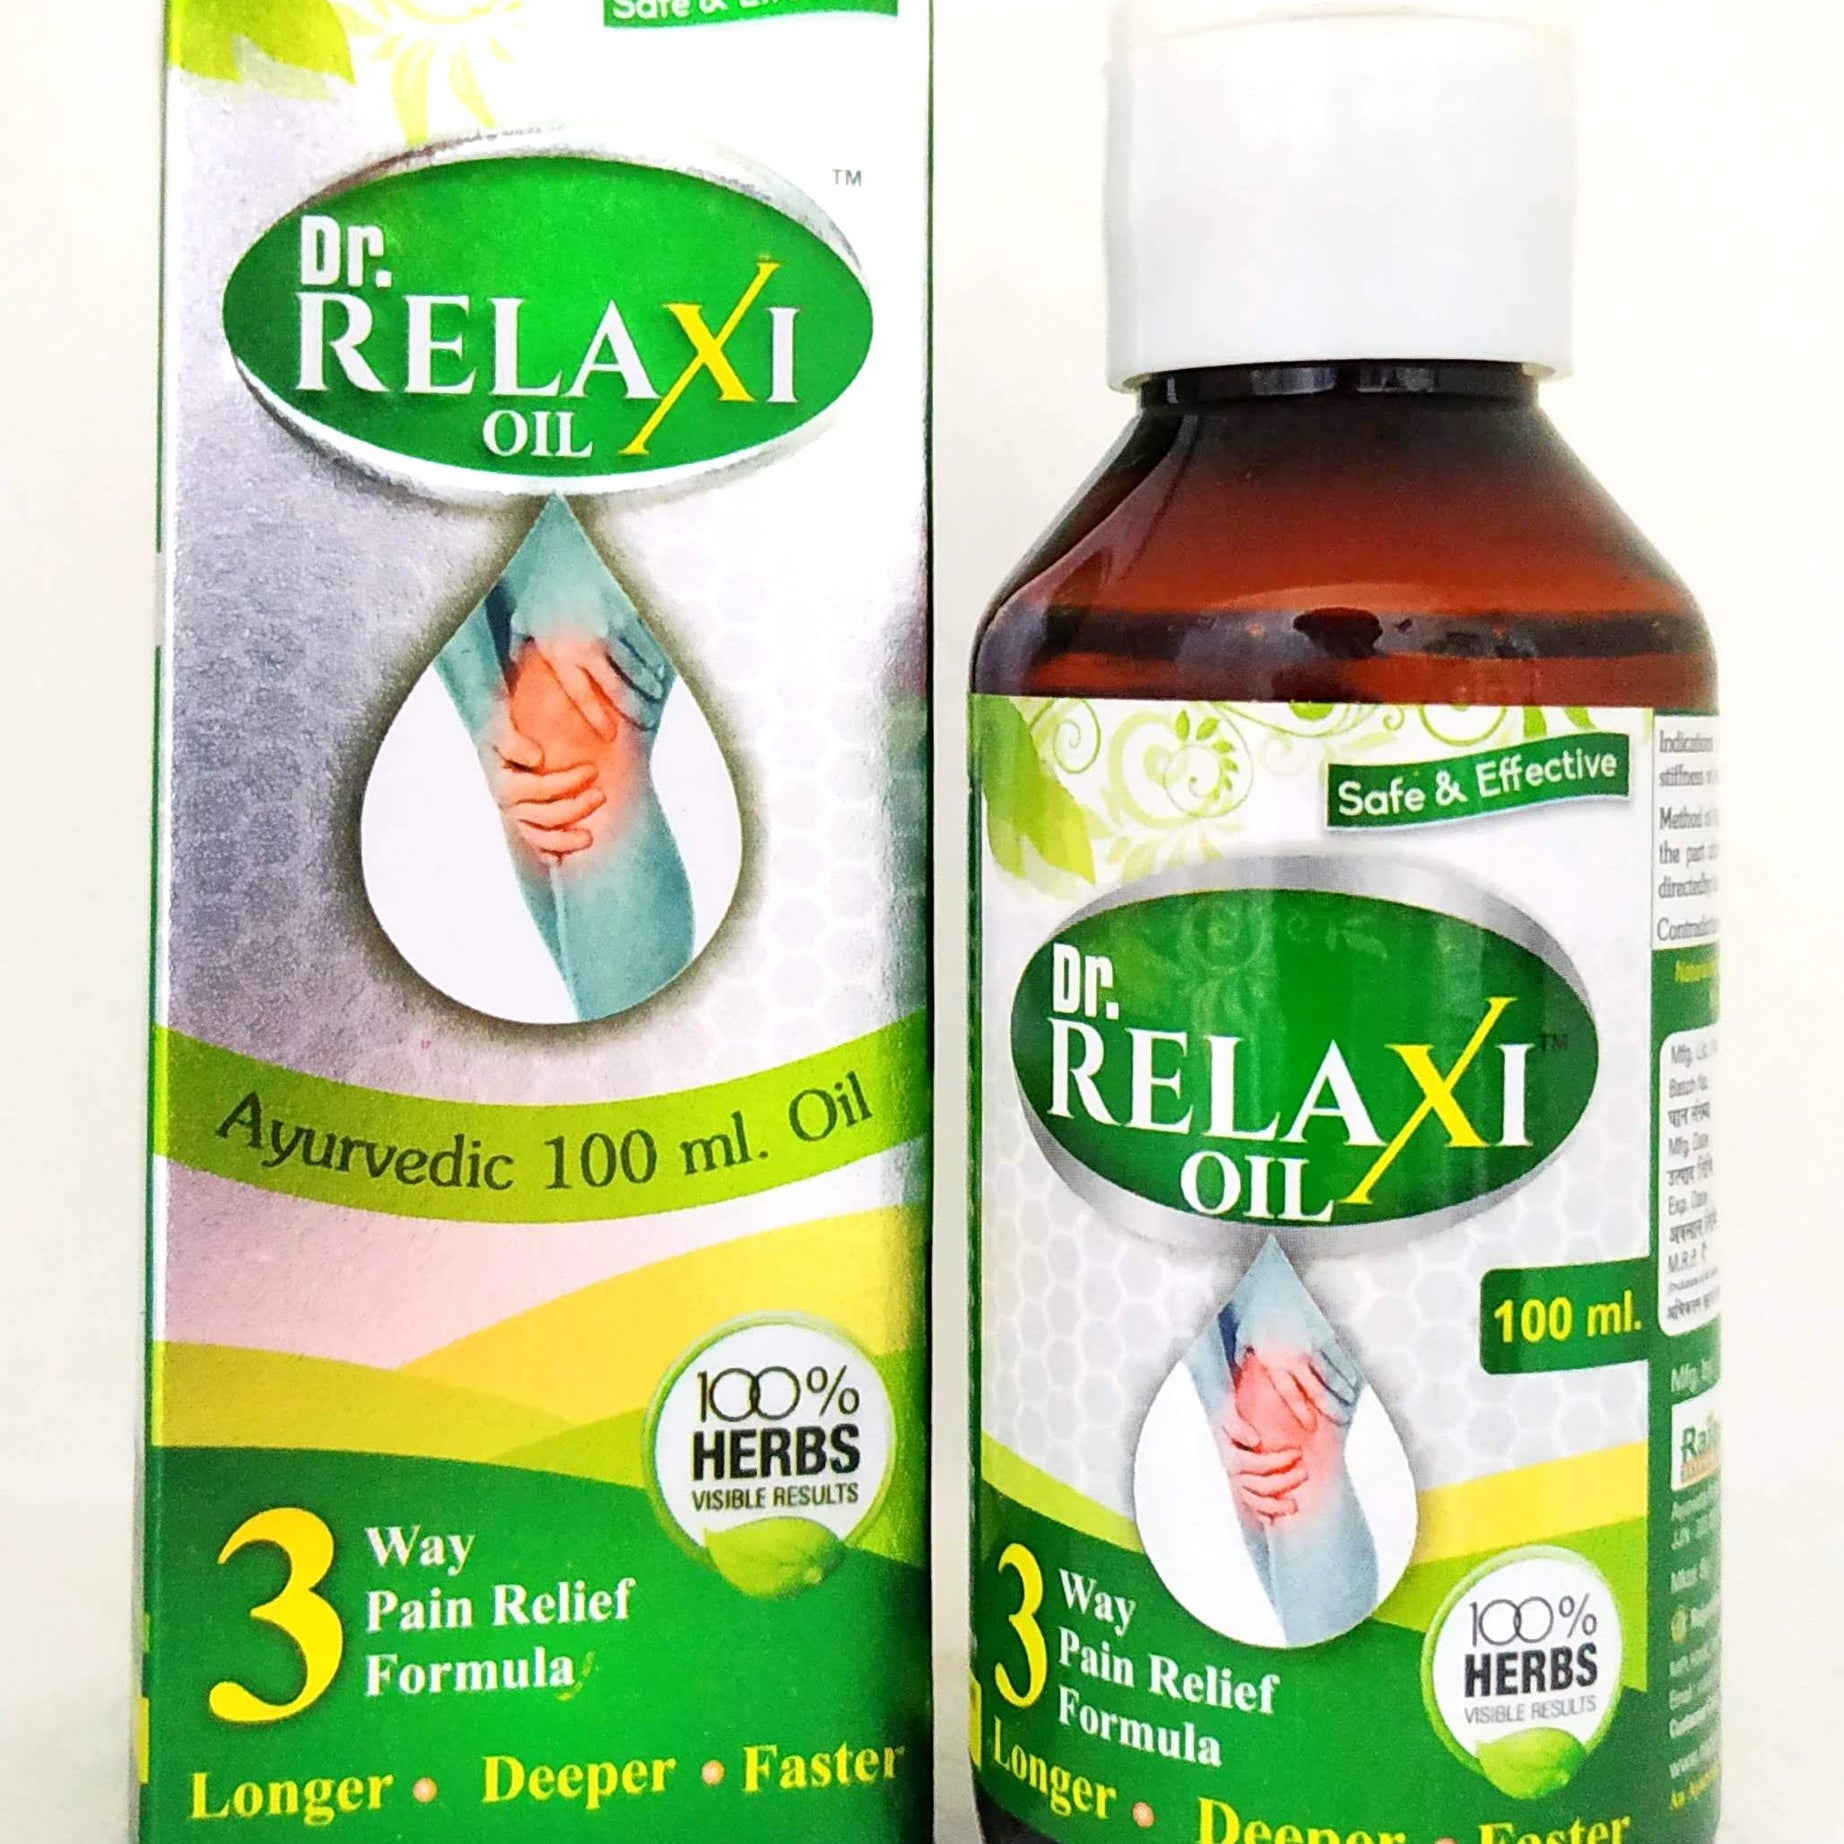 Shop Dr.Relaxi Oil 100ml at price 239.00 from Rajasthan Herbals Online - Ayush Care